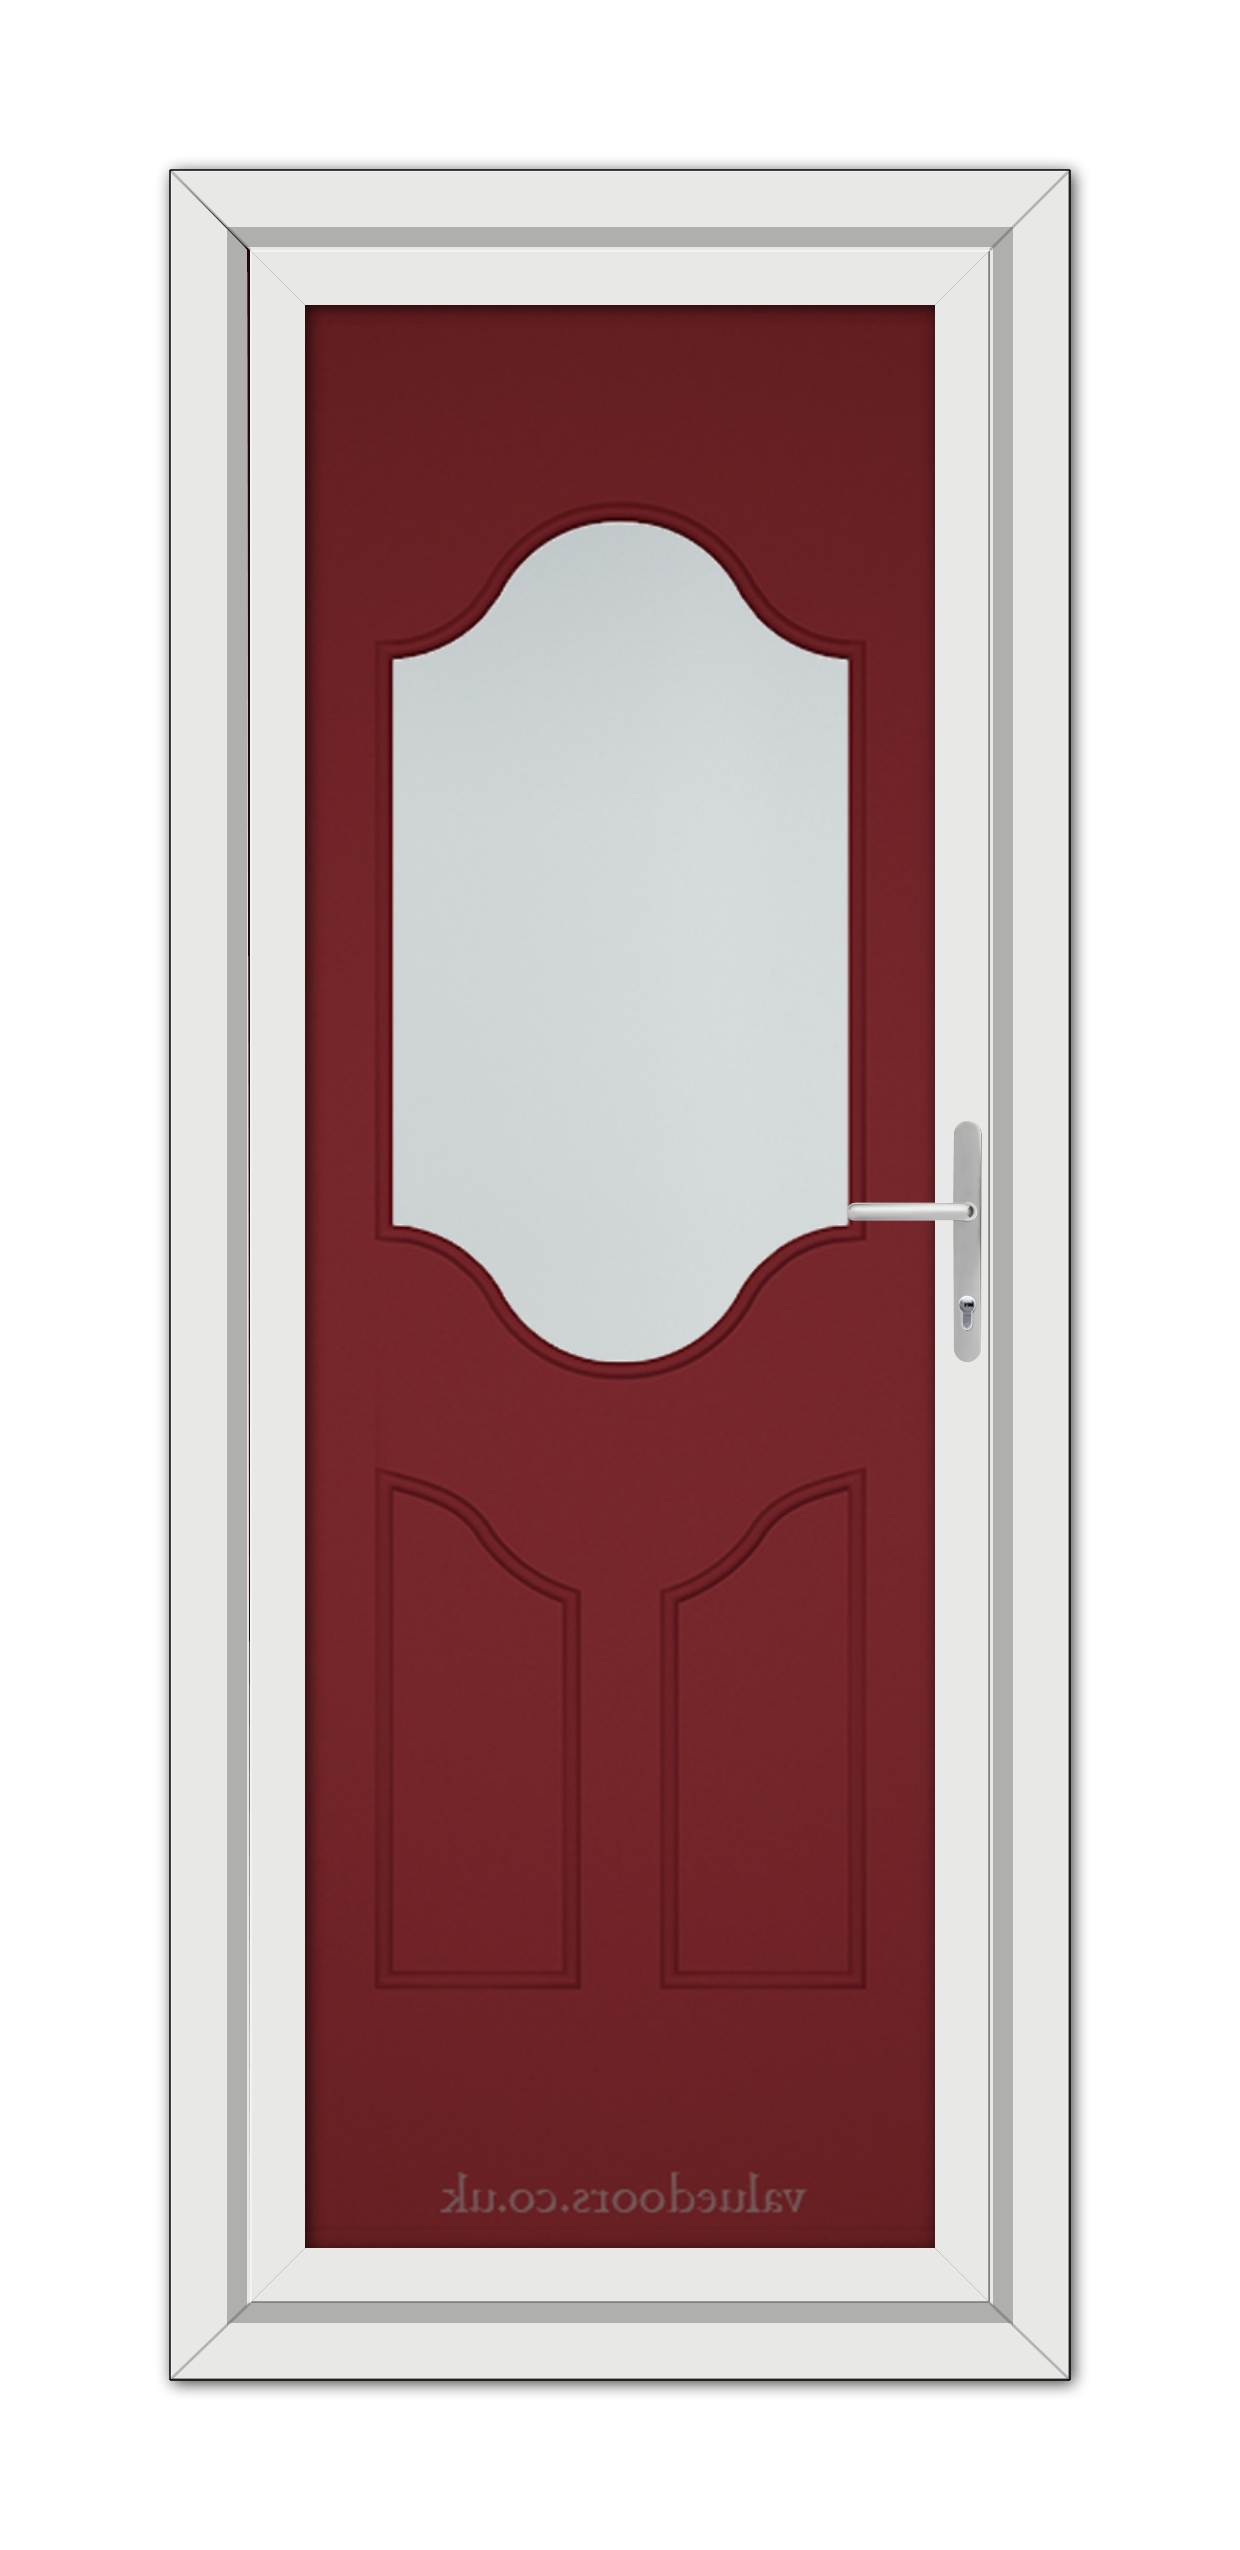 Red Althorpe One uPVC Door with a white frame.